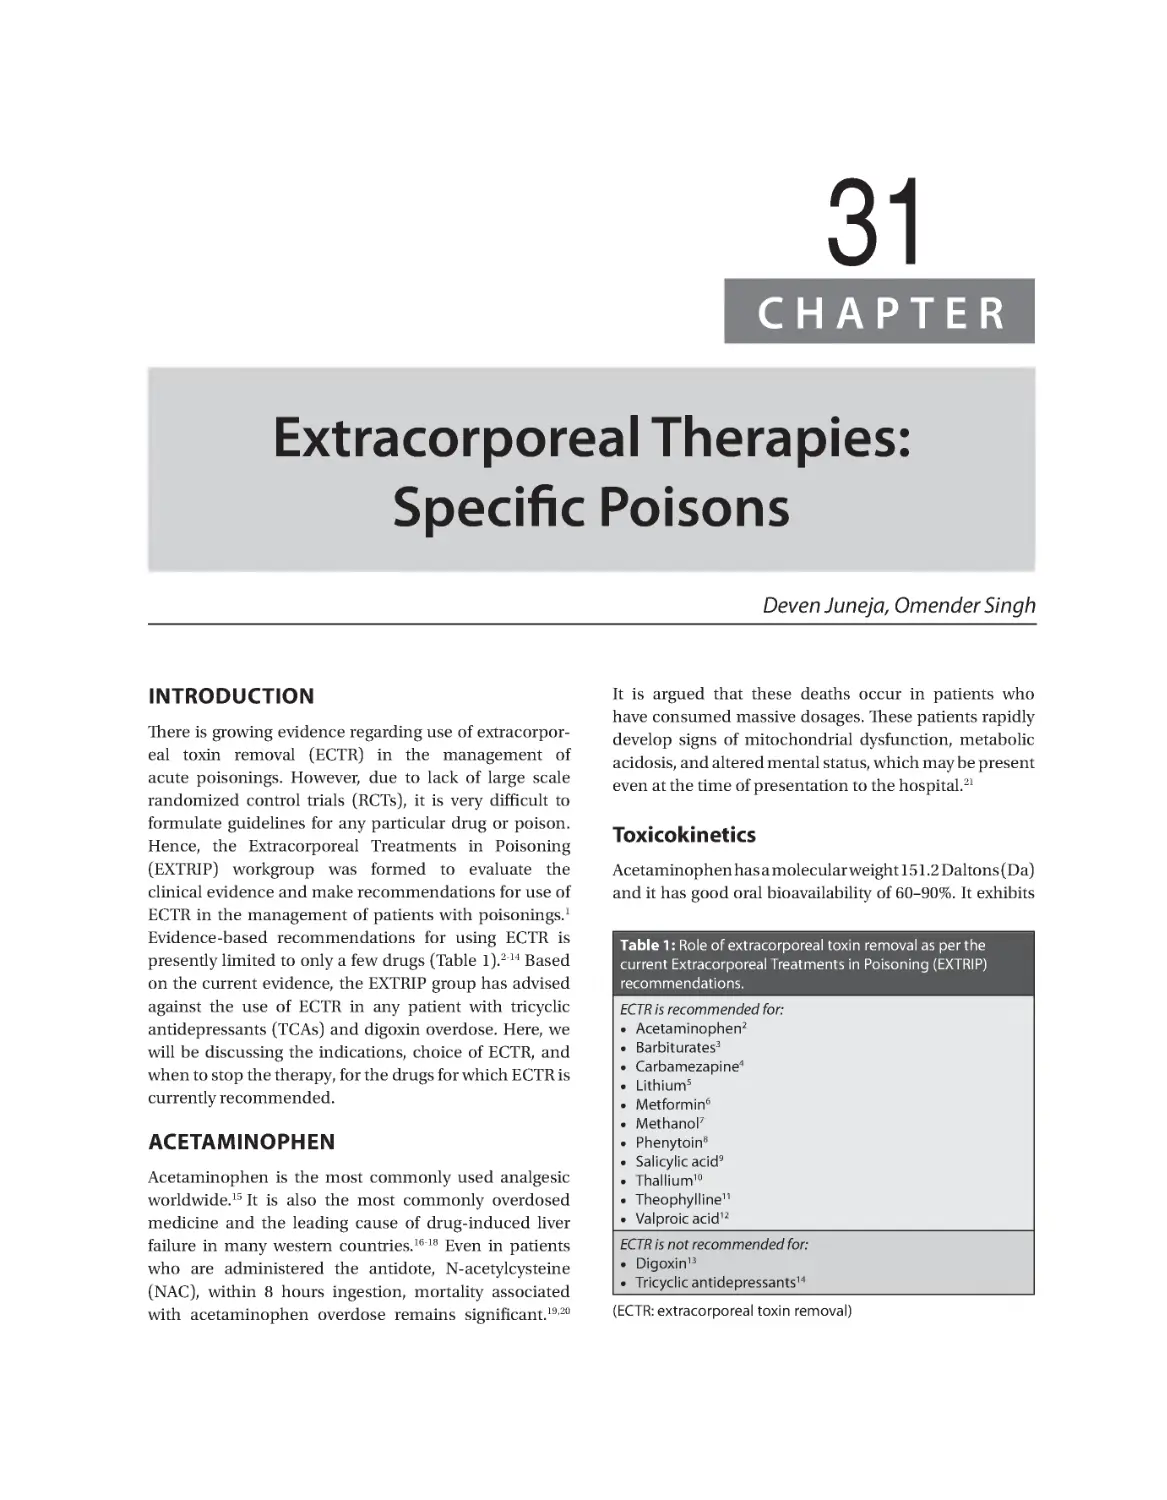 Chapter 31: Extracorporeal Therapies: Specific Poisons